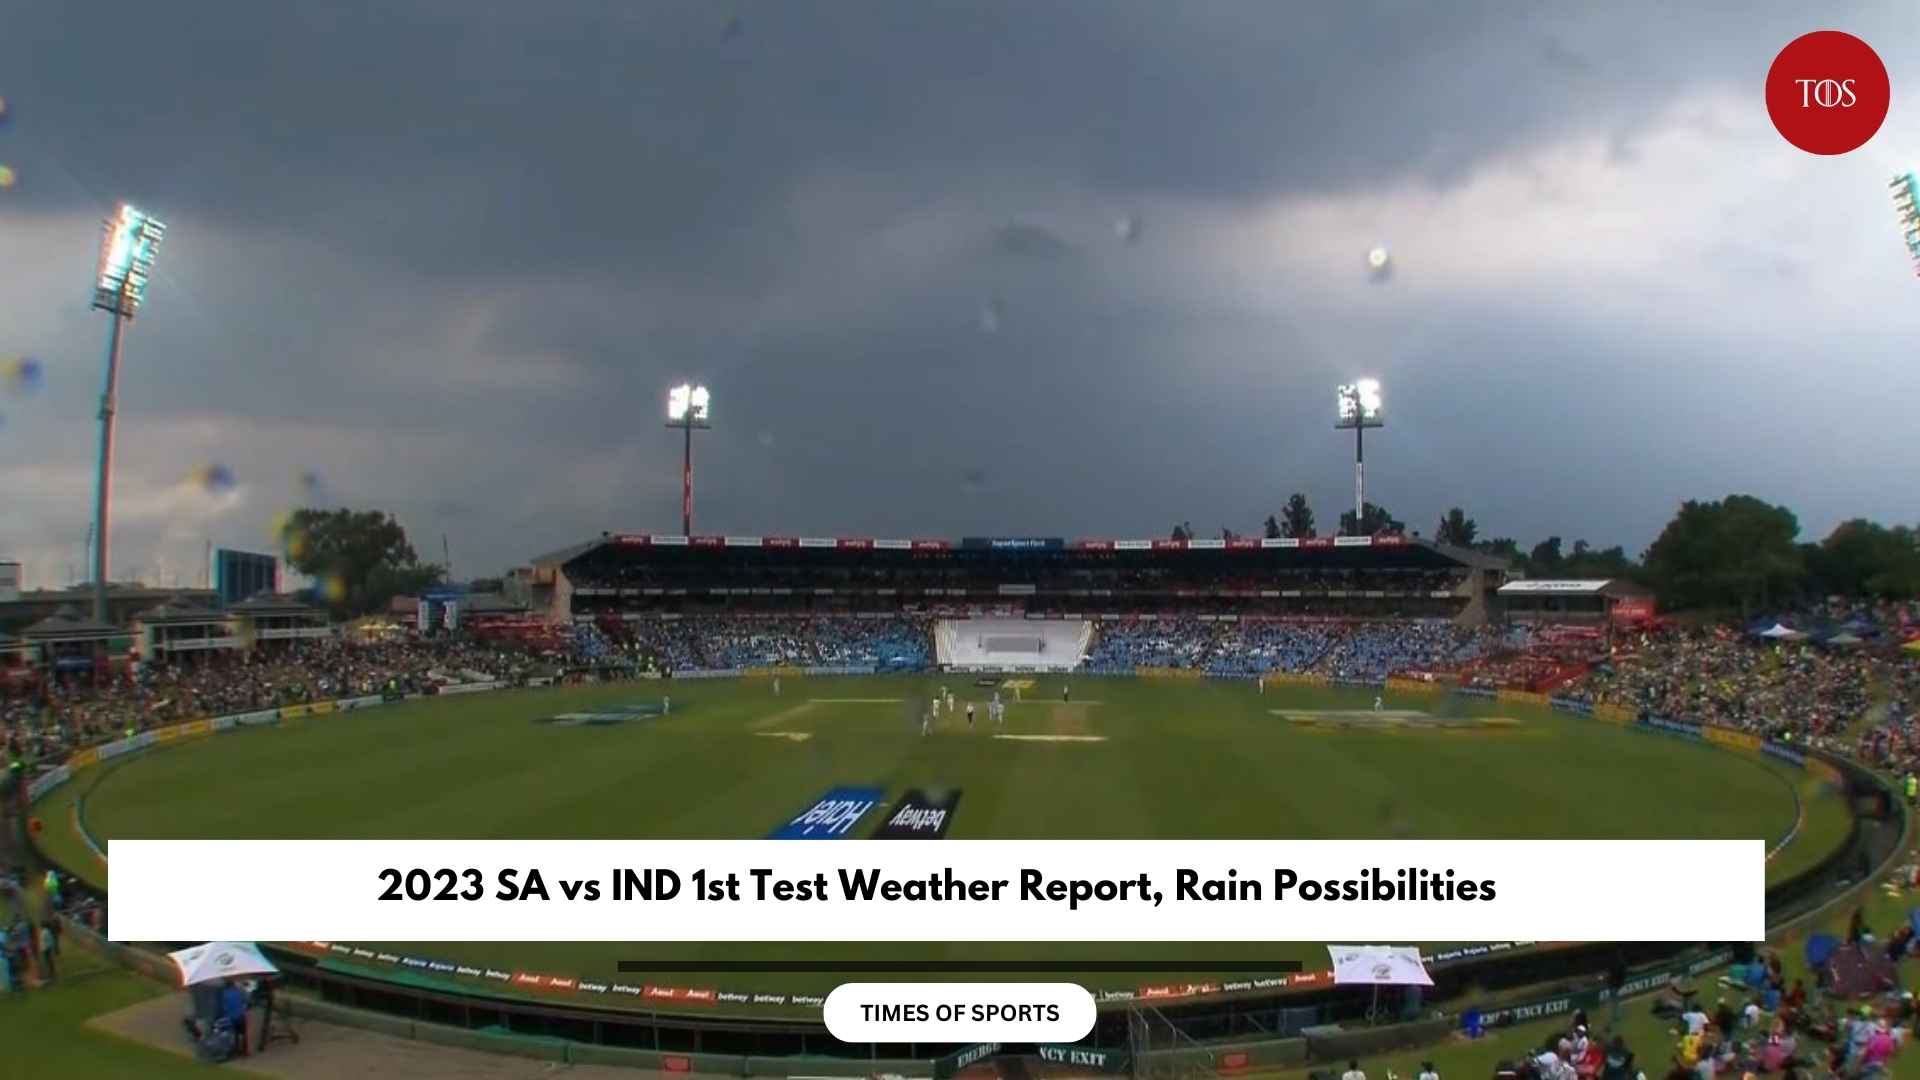 2023 SA vs IND 1st Test Weather Report